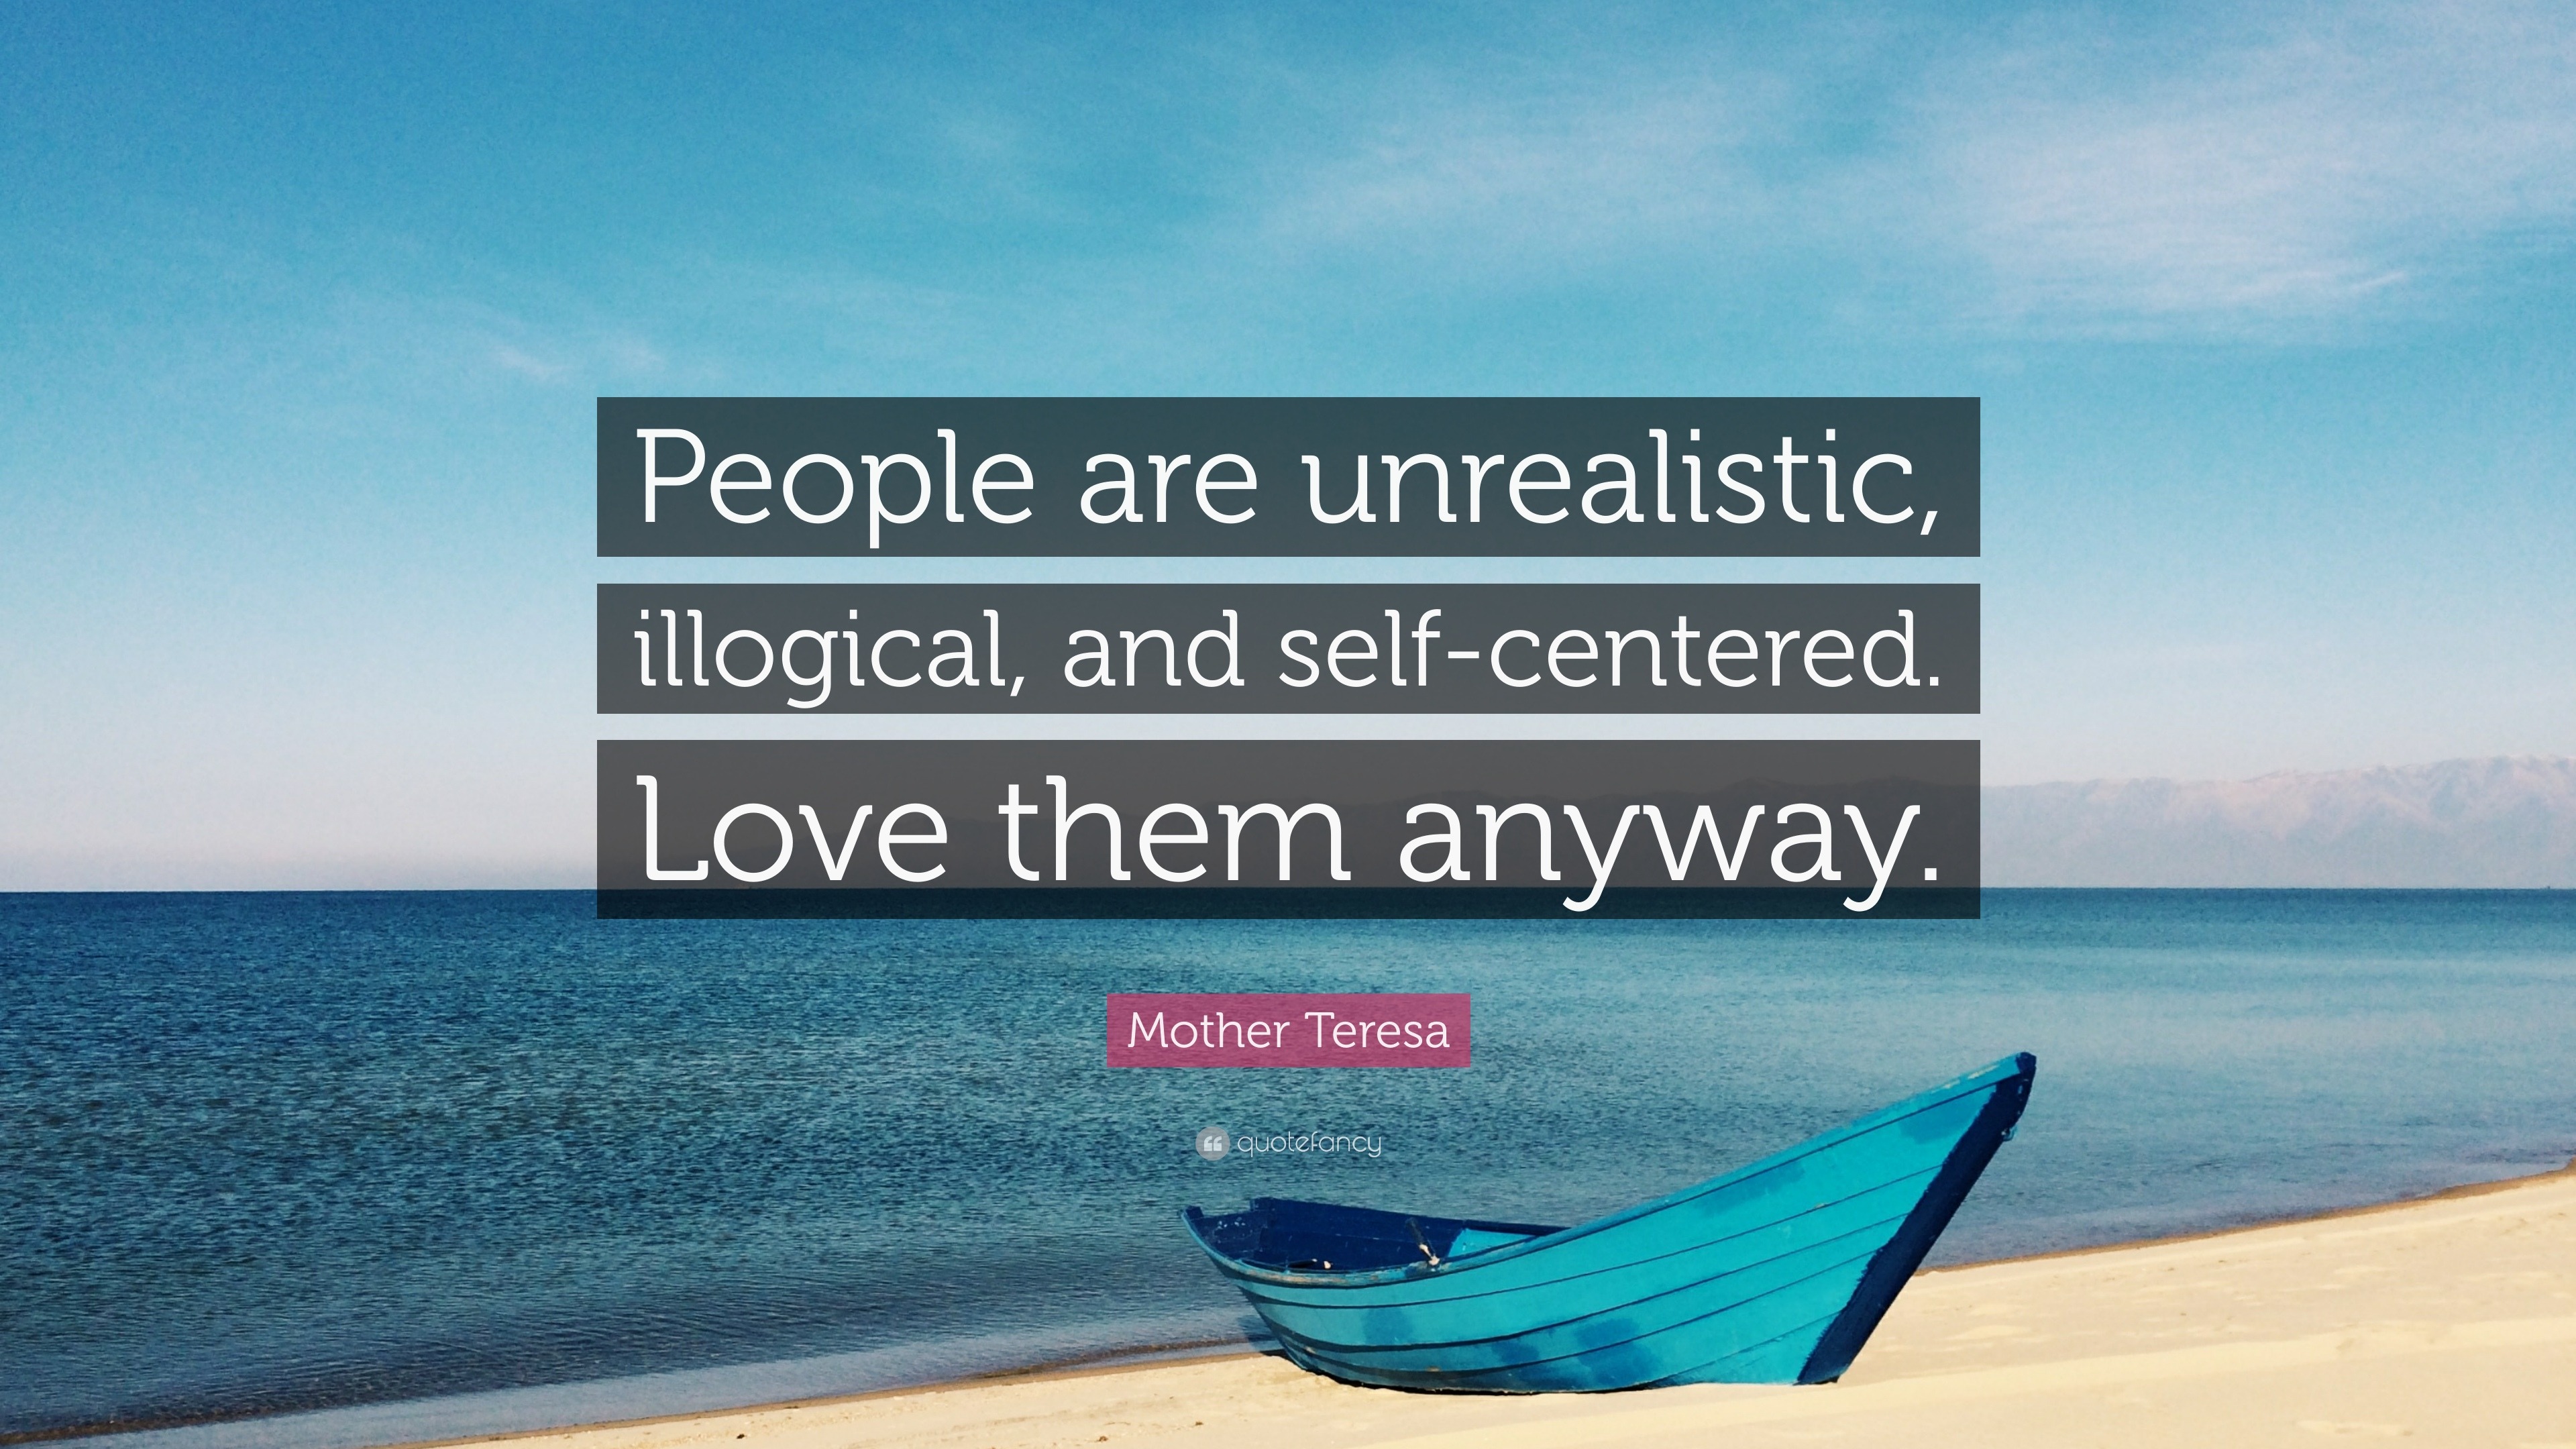 Mother Teresa Quote “People are unrealistic illogical and self centered